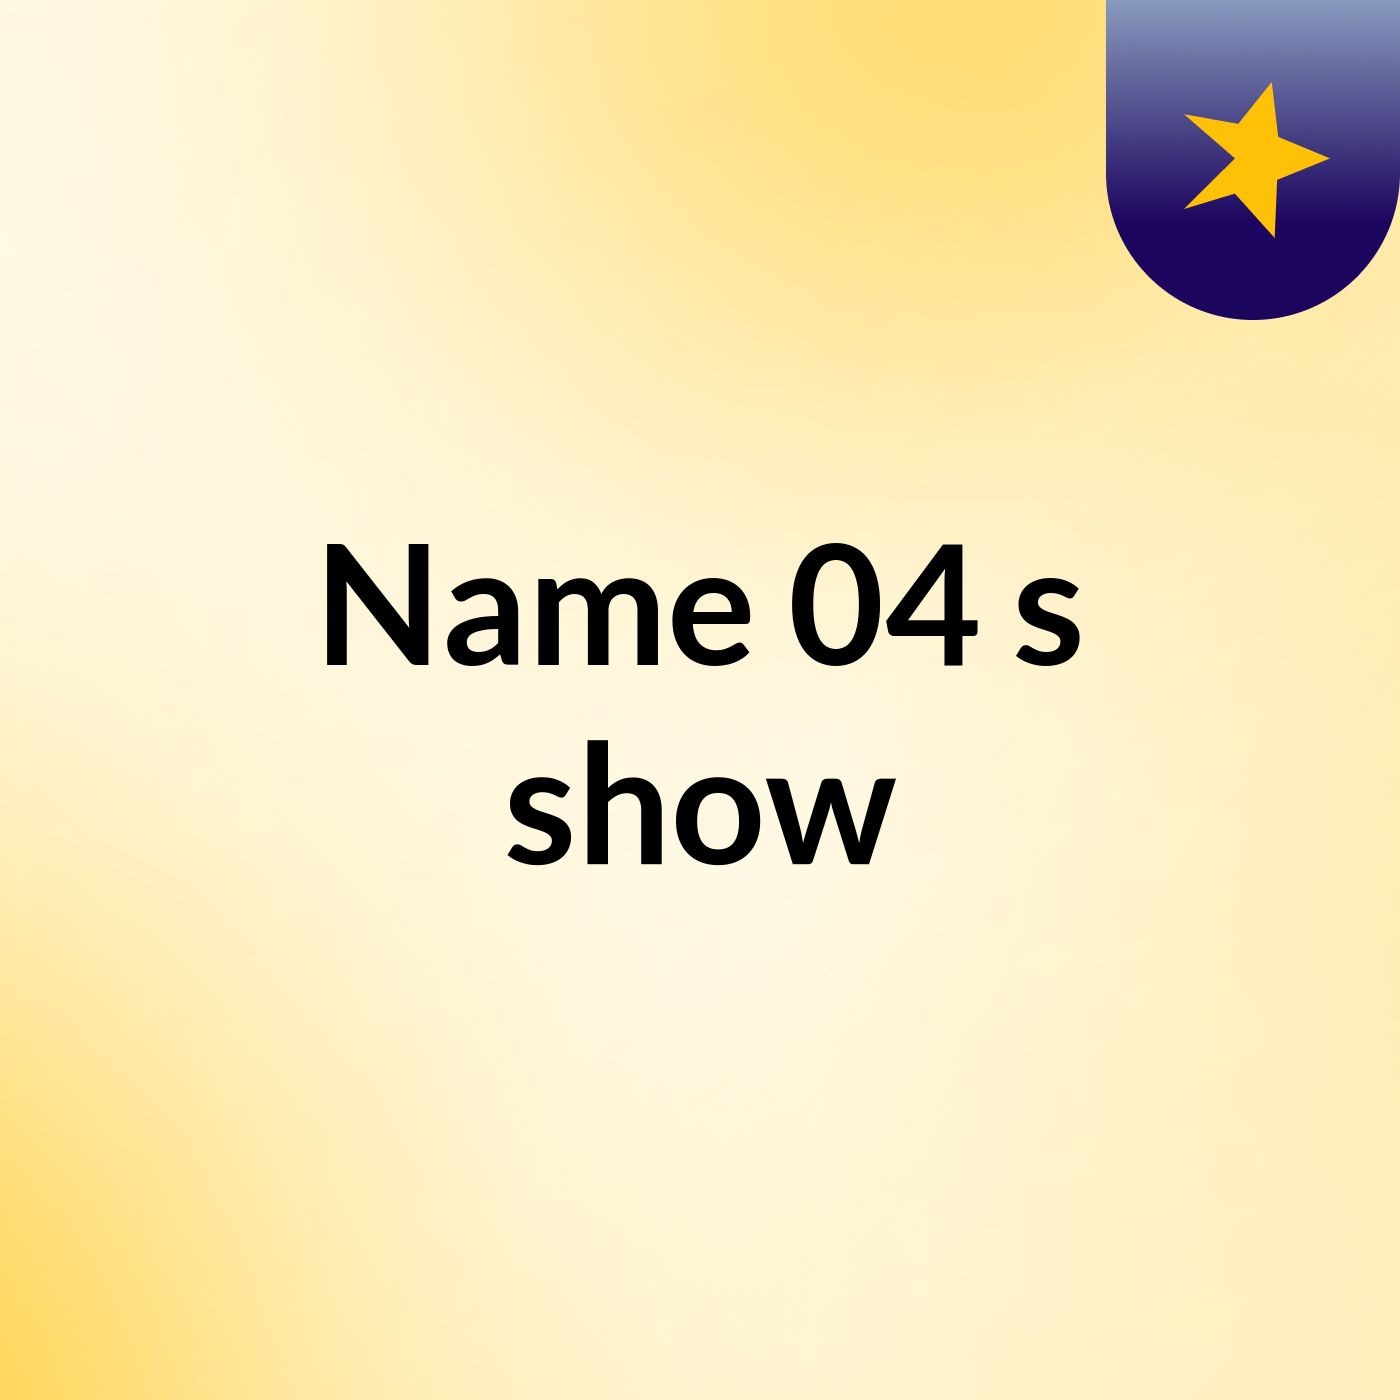 Name 04's show